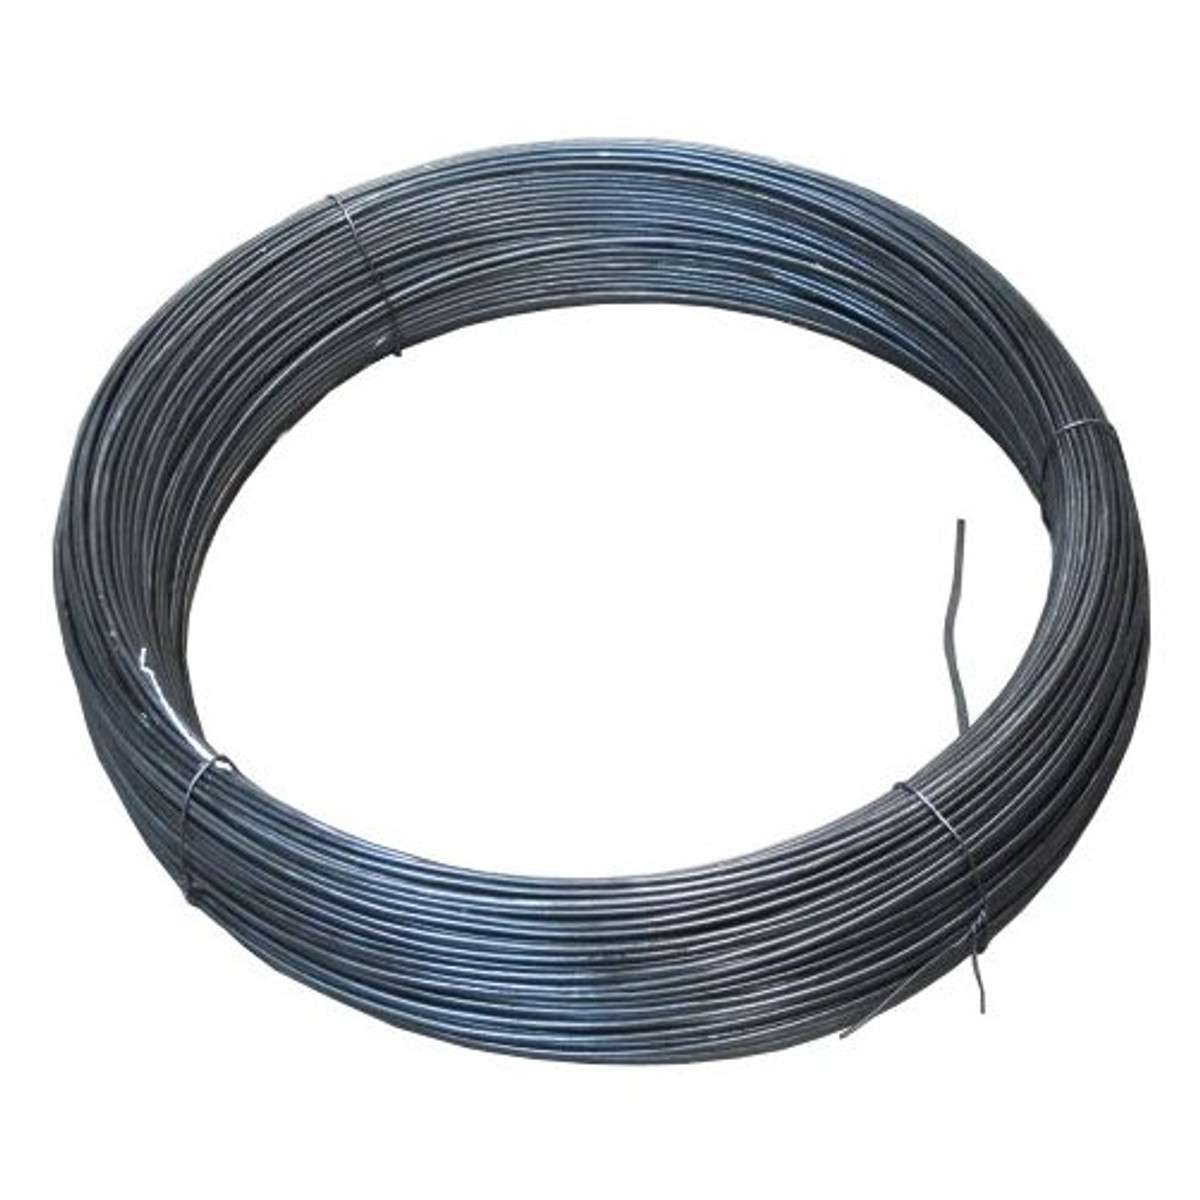 50 lb. Coil 9 Ga. Black Tie Wire - (Available For Local Pick Up Only)